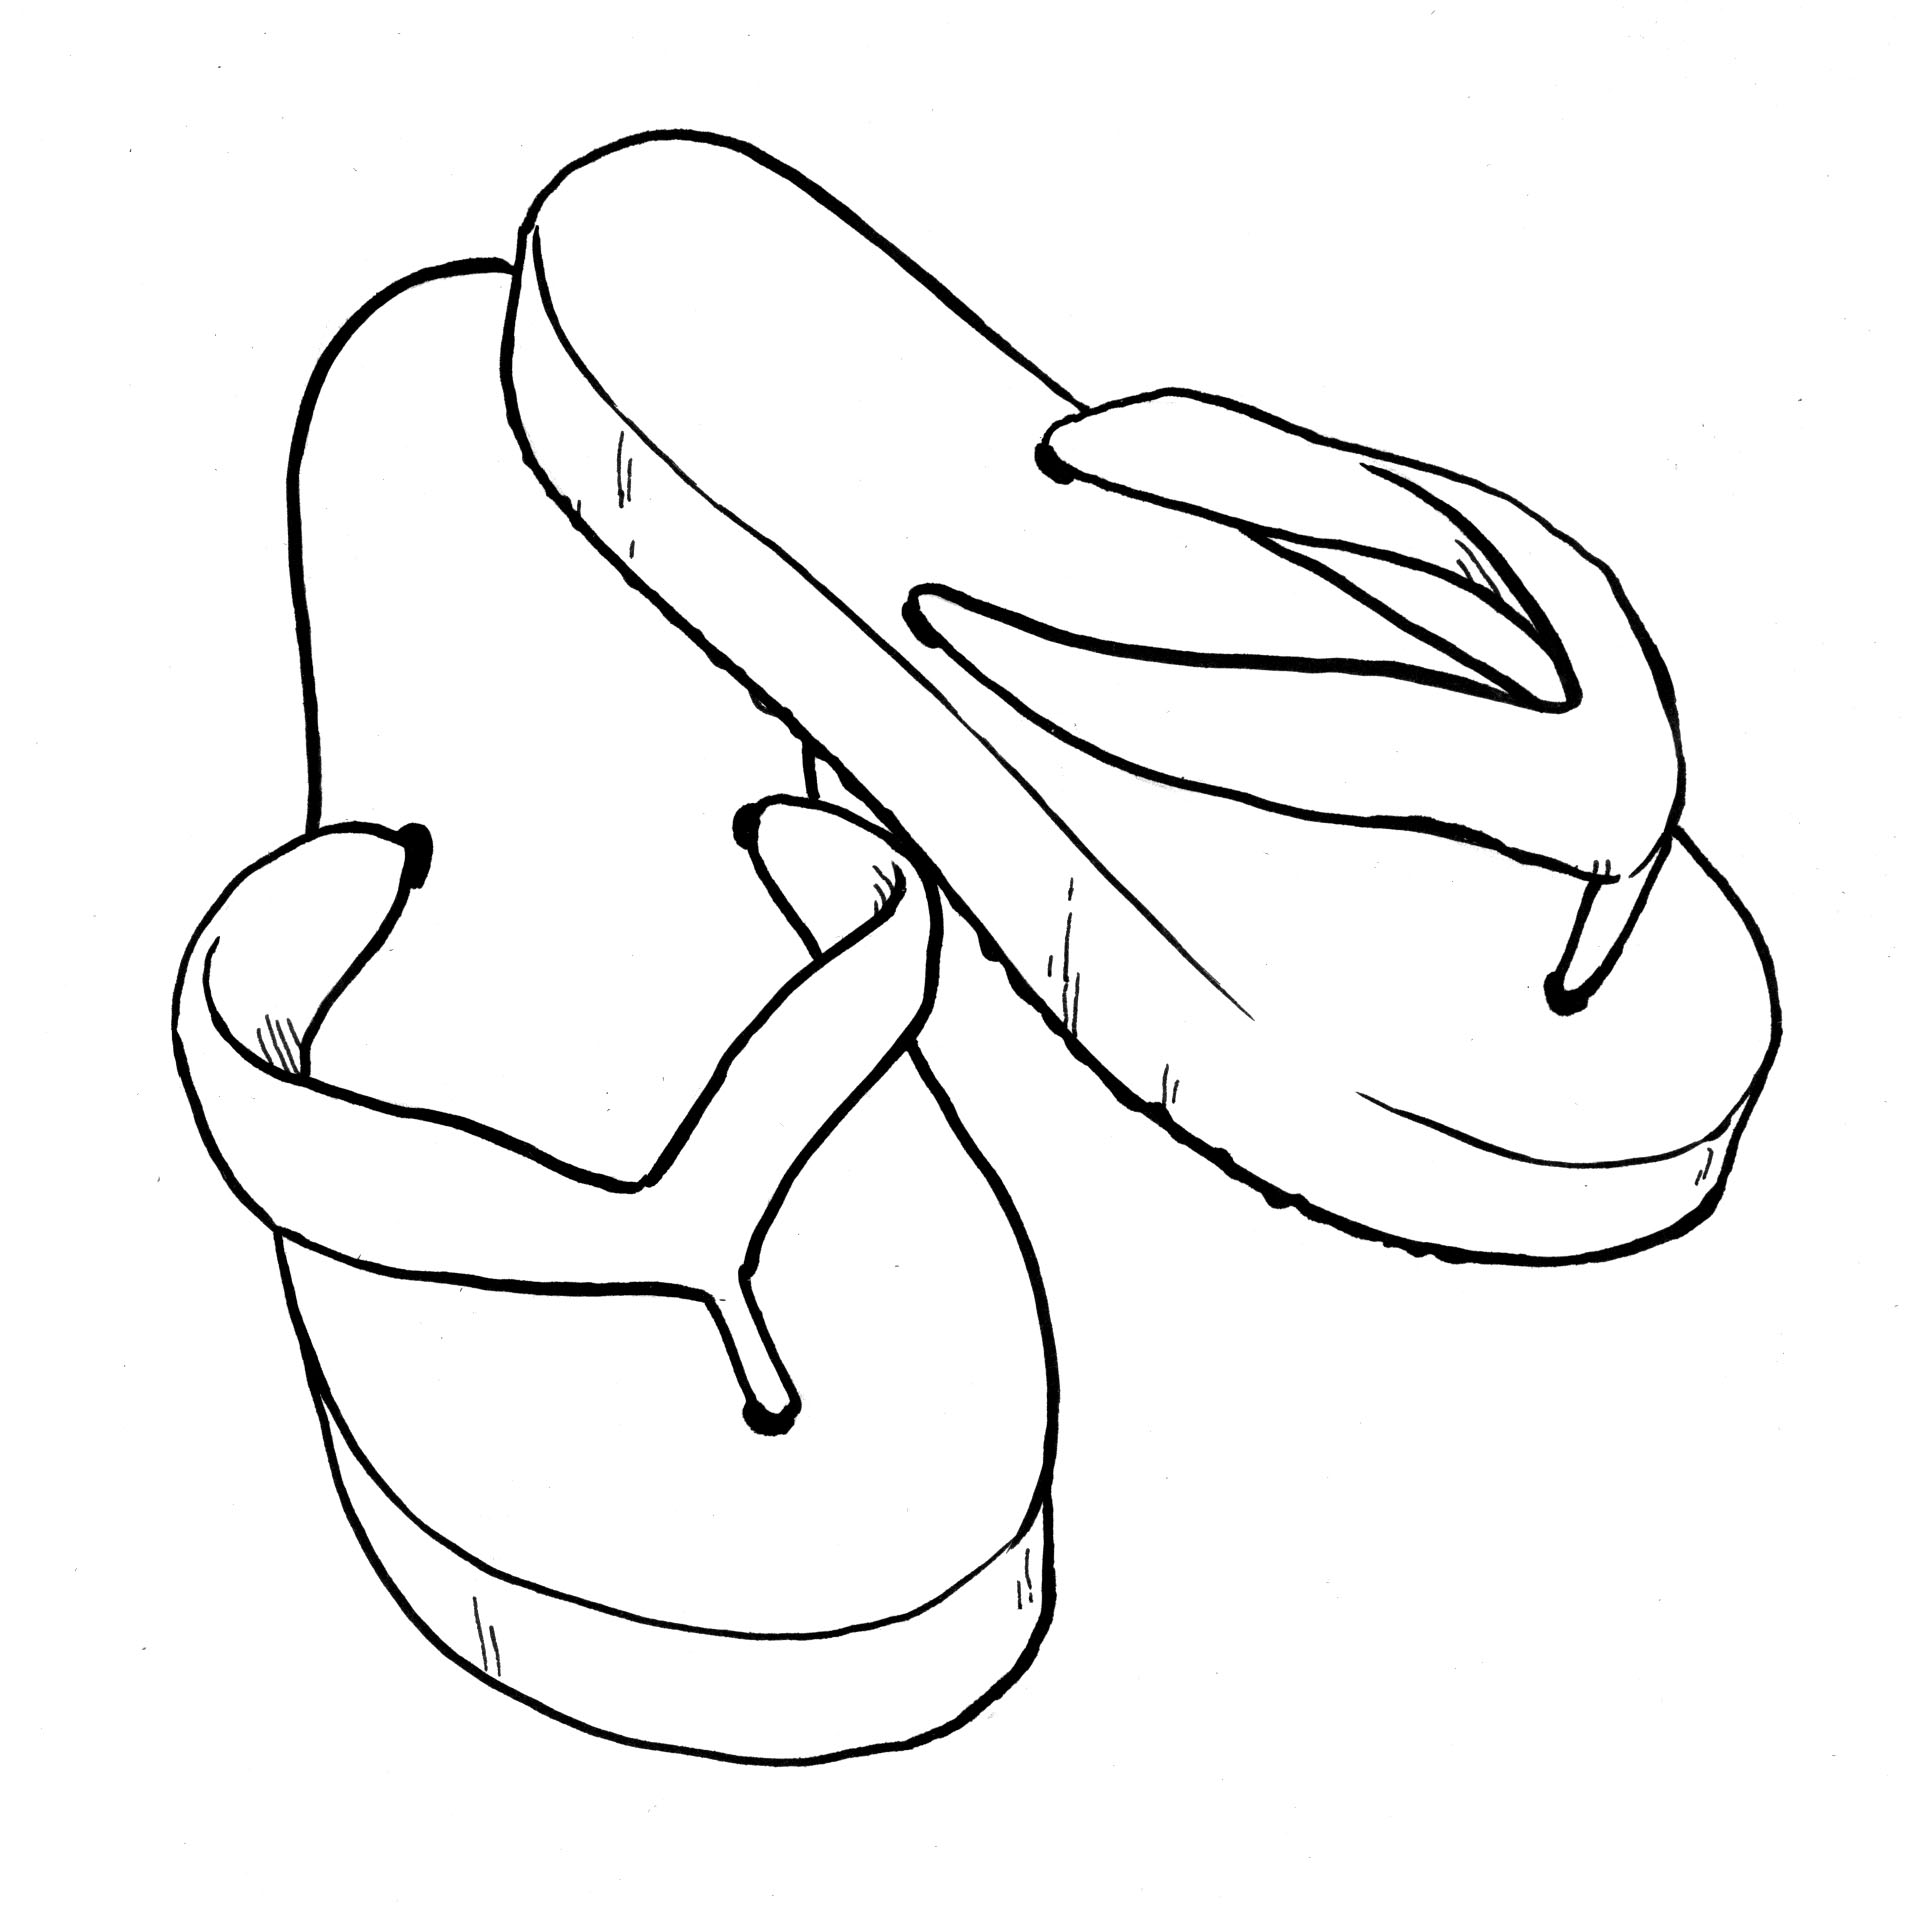 Flip Flops Clipart Black And White   Clipart Panda   Free Clipart    